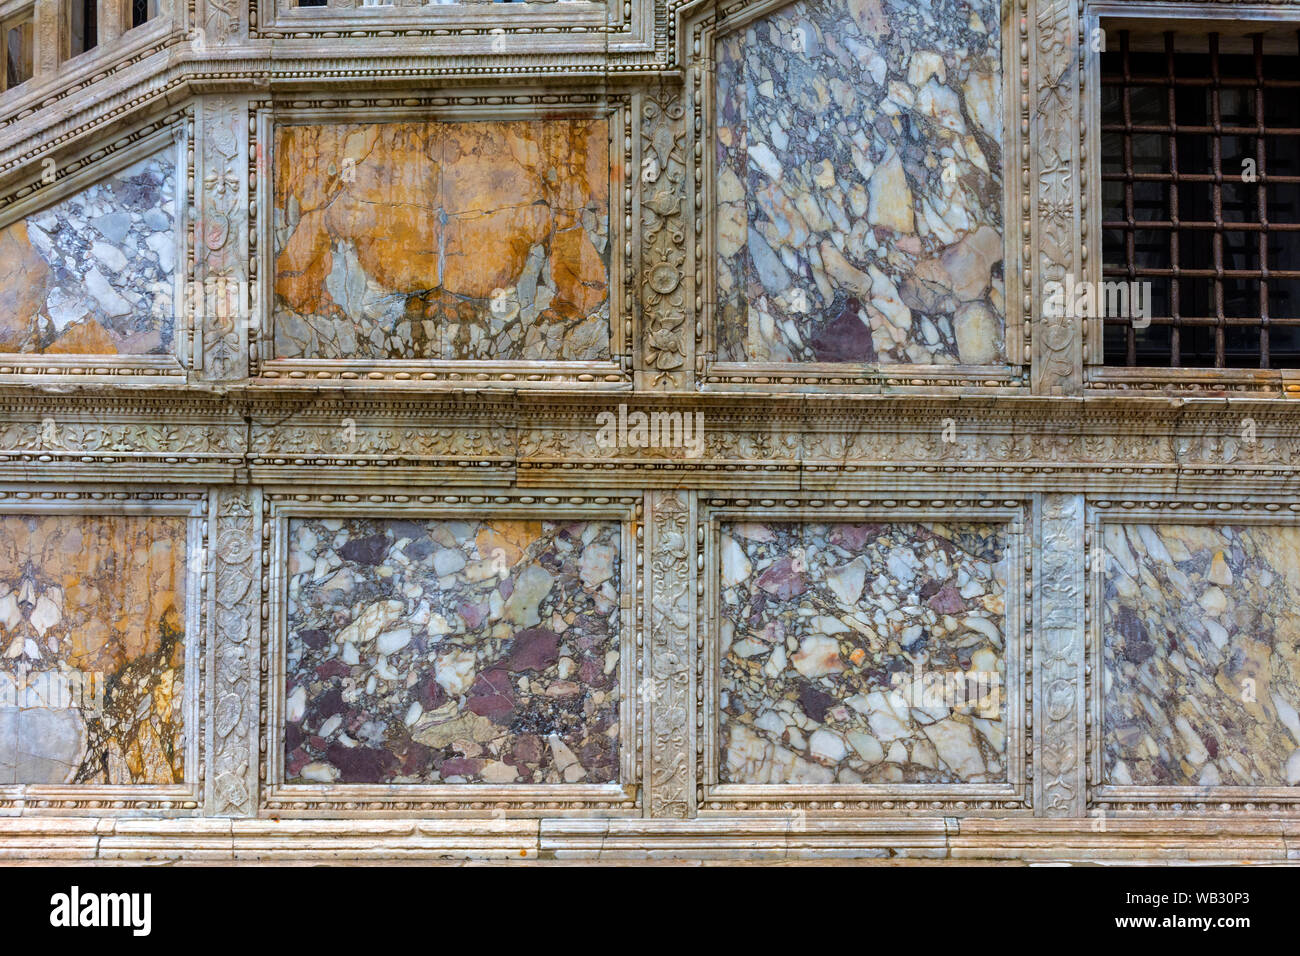 Stone panelling on the side of the Giant's Staircase (Scala dei Giganti), in the courtyard of the Doge's Palace (Palazzo Ducale), Venice, Italy Stock Photo